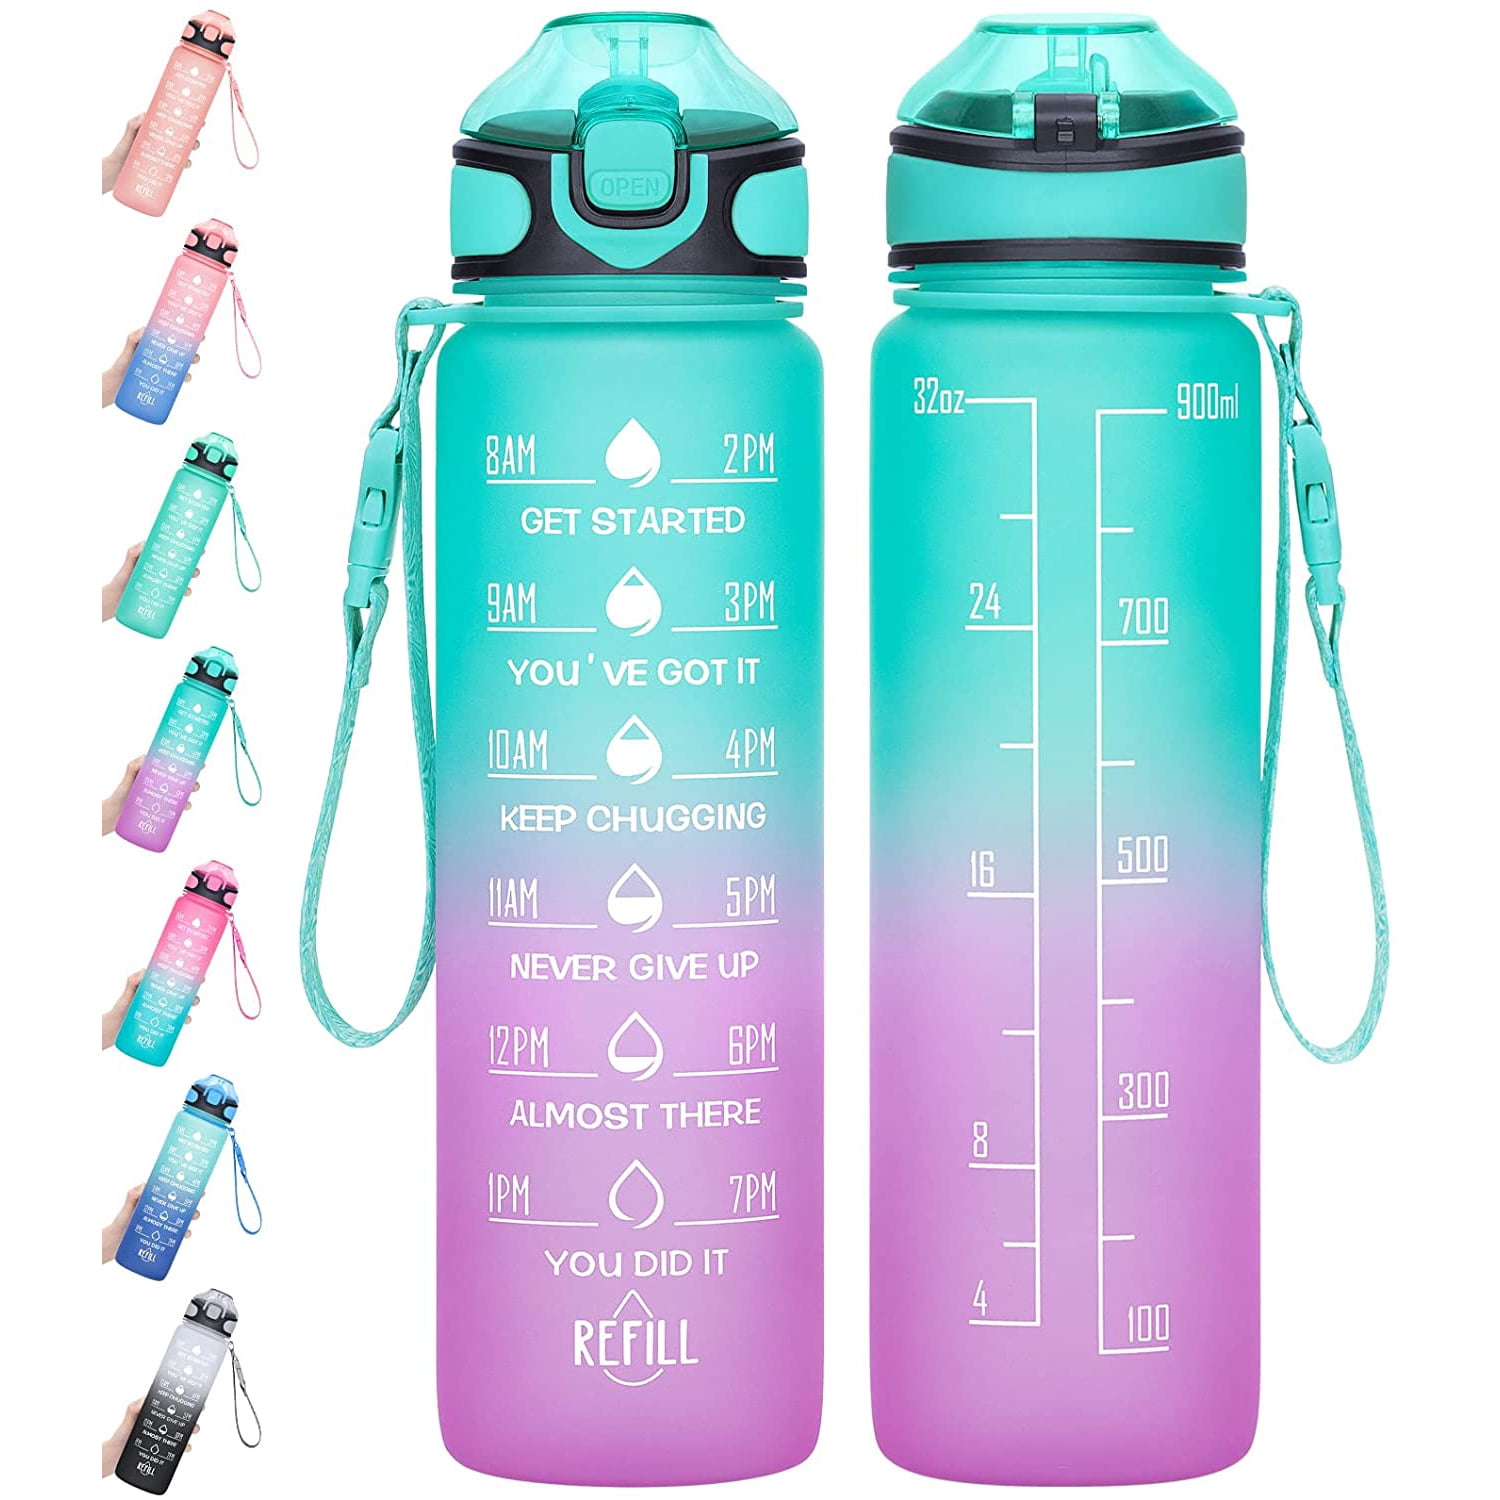 Esgreen 32 oz Motivational Water Bottles With Time Maker, Big 1000ml  BPA-free Plastic Water Jugs For Men Women, No Straw Leak-proof Sturdy  Drinking Bottles With Strap For Sports Workout Gym Travel 